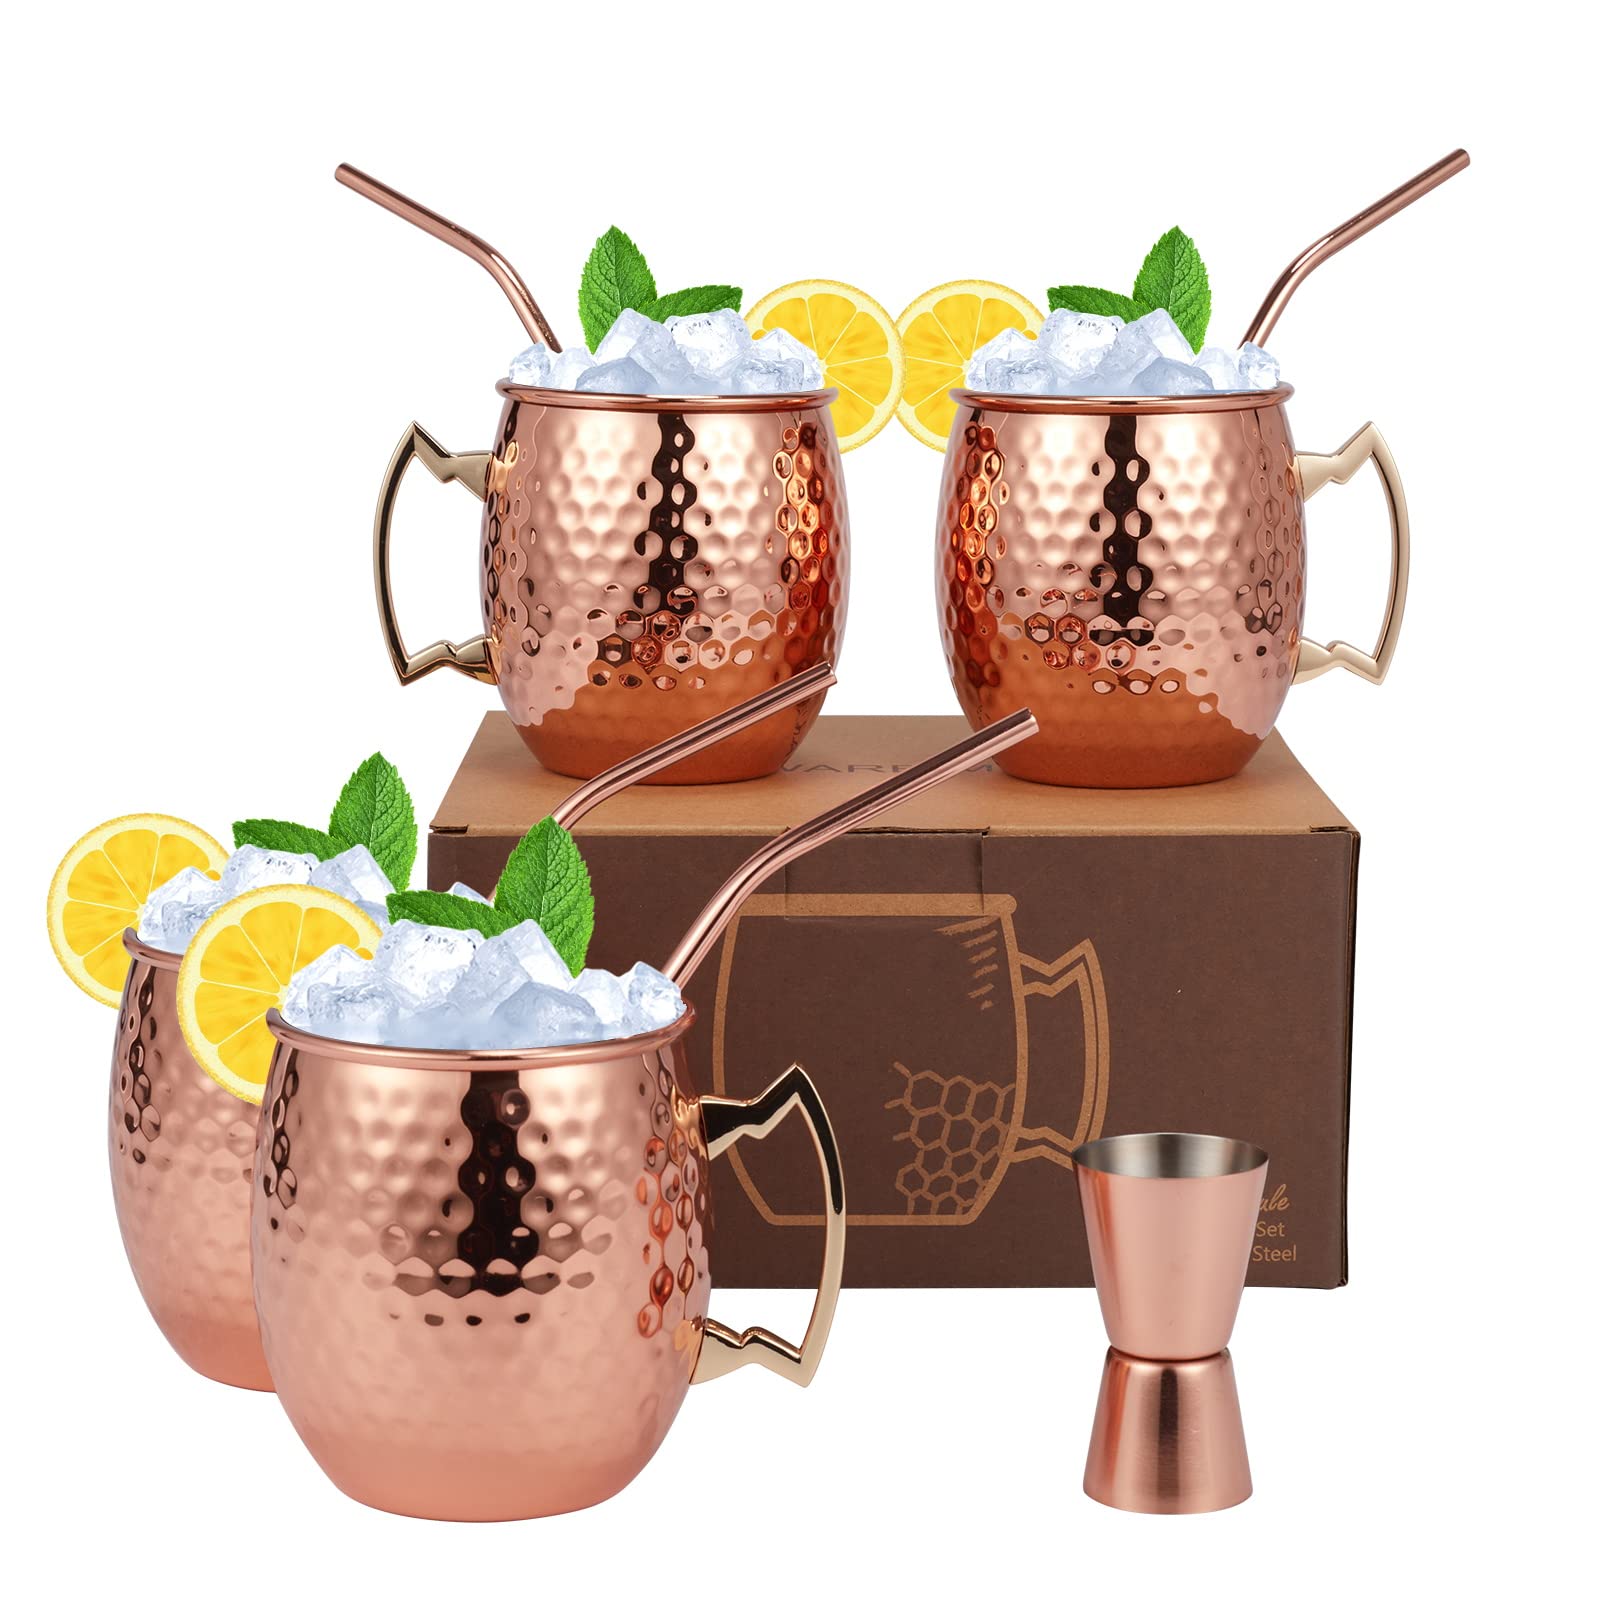 Moscow Mule Mugs Set of 9 - 20oz Hammered Moscow Mule Mugs Drinking Cup 304 Stainless Steel with 4 Straws-1 Jigger-Great Dining Entertaining bar Gift Set Mug Set of 4 (double jigger included)